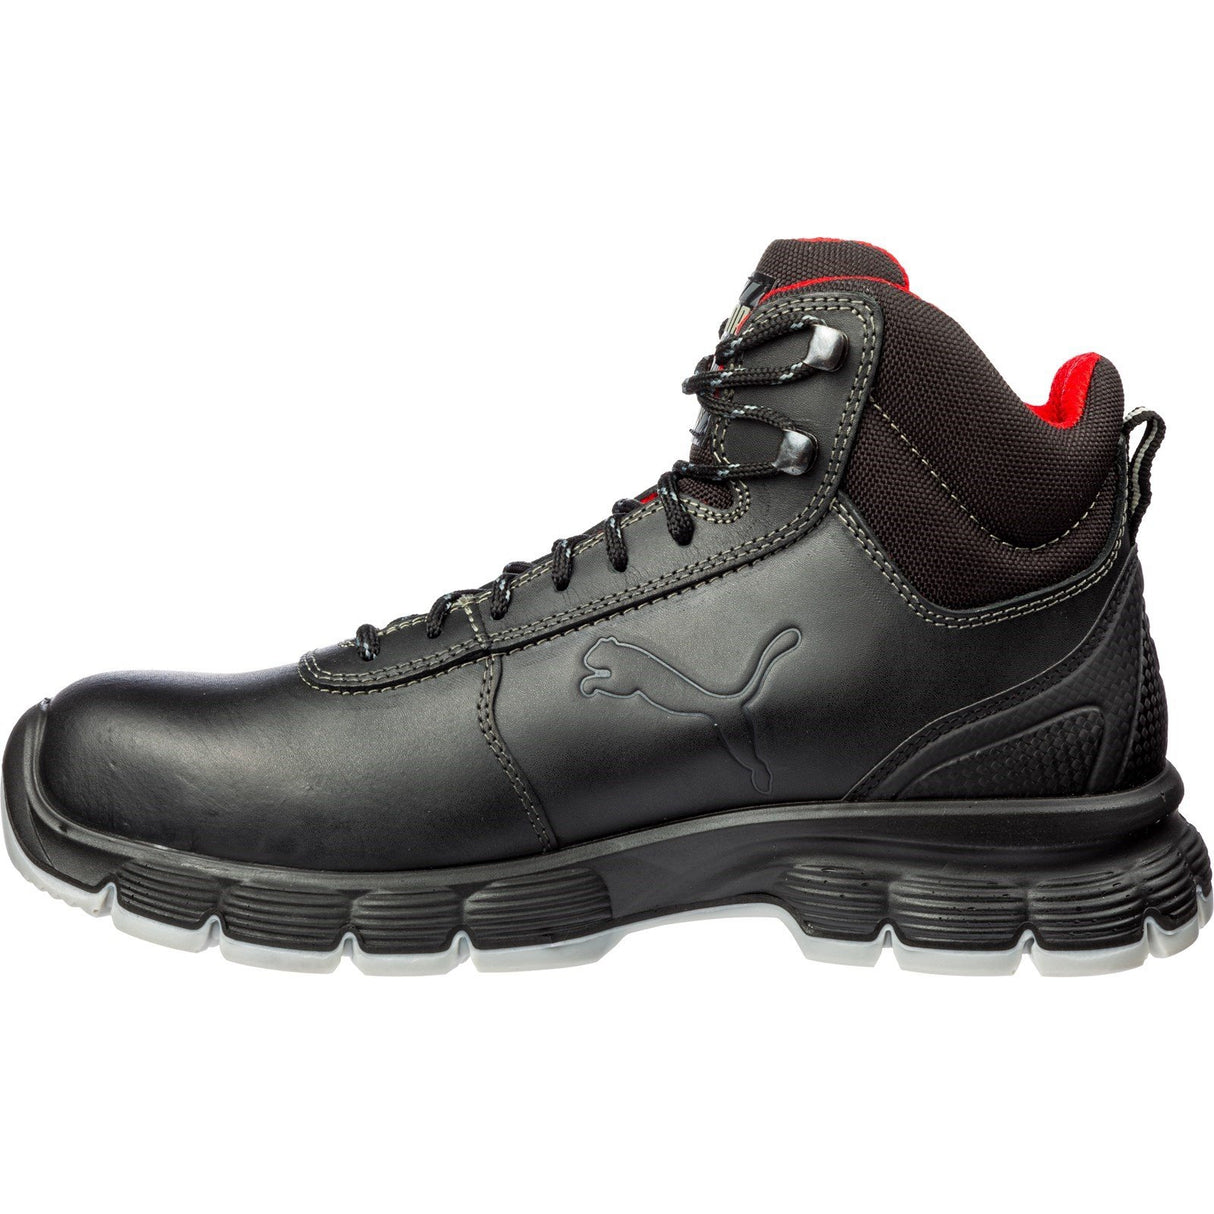 Puma Safety Condor Mid S3 Safety Boots